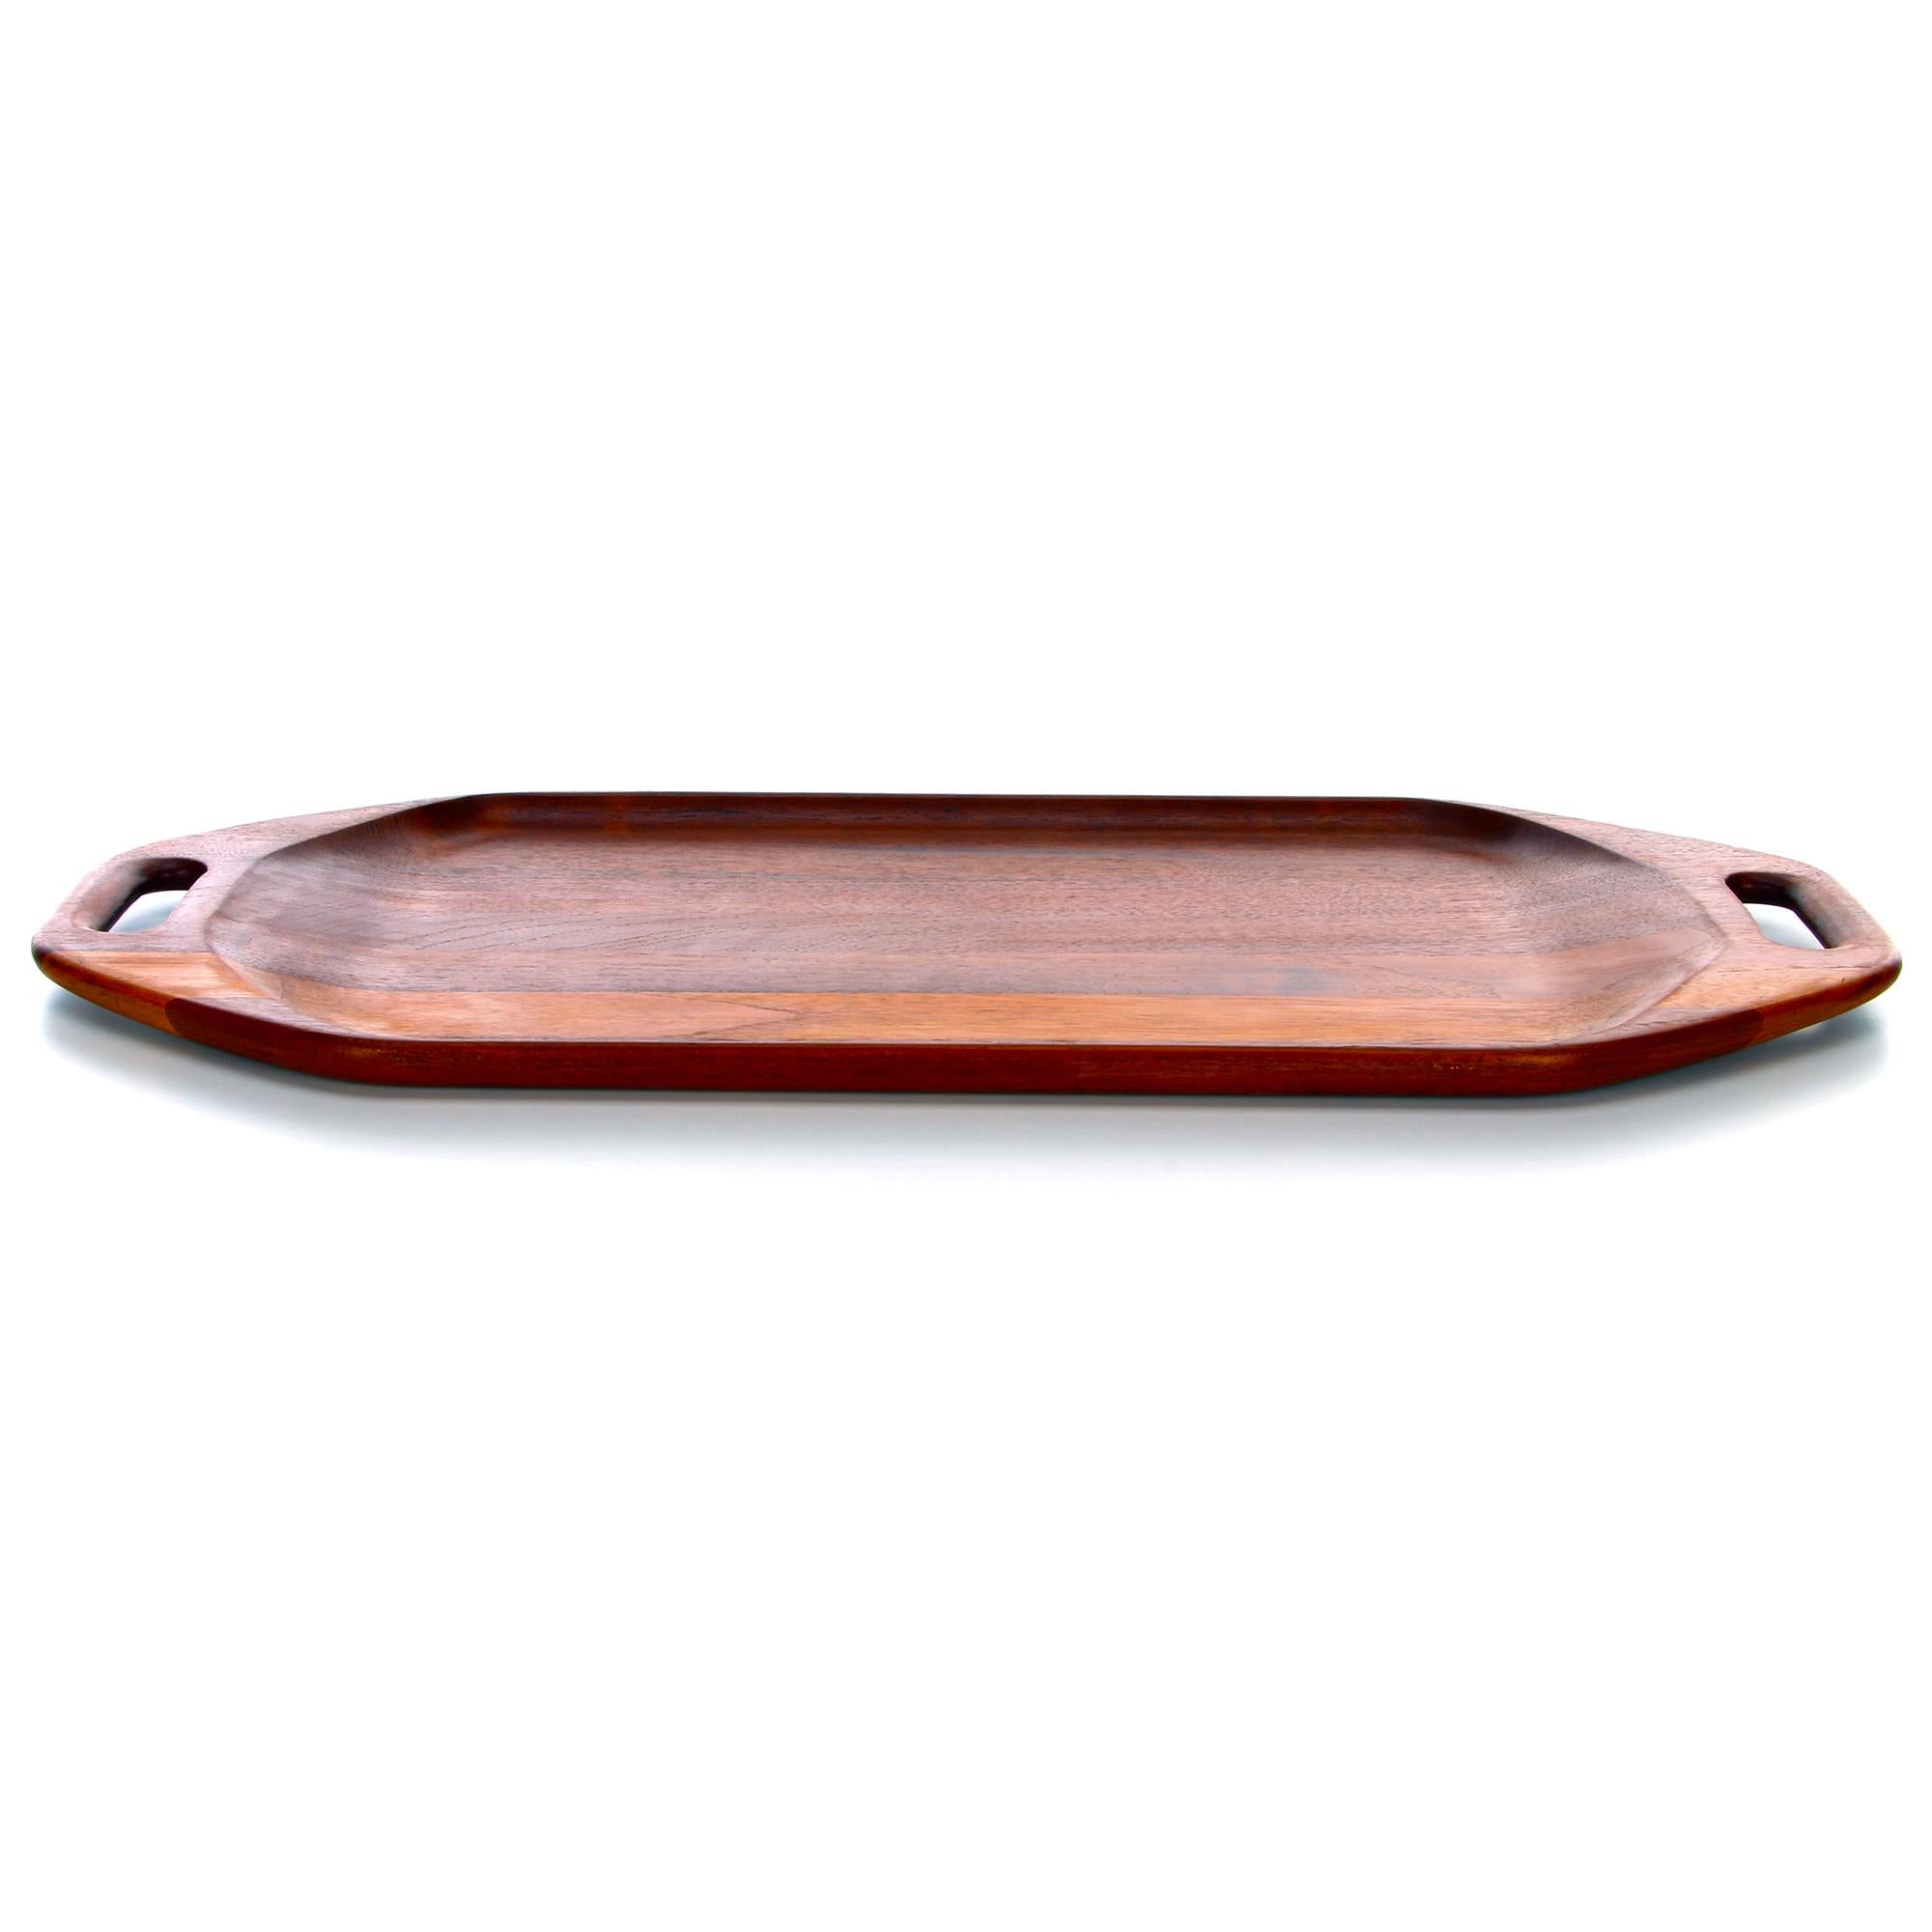 Teak Tray by Digsmed 1964, Large Danish Modern Severing Tray 2